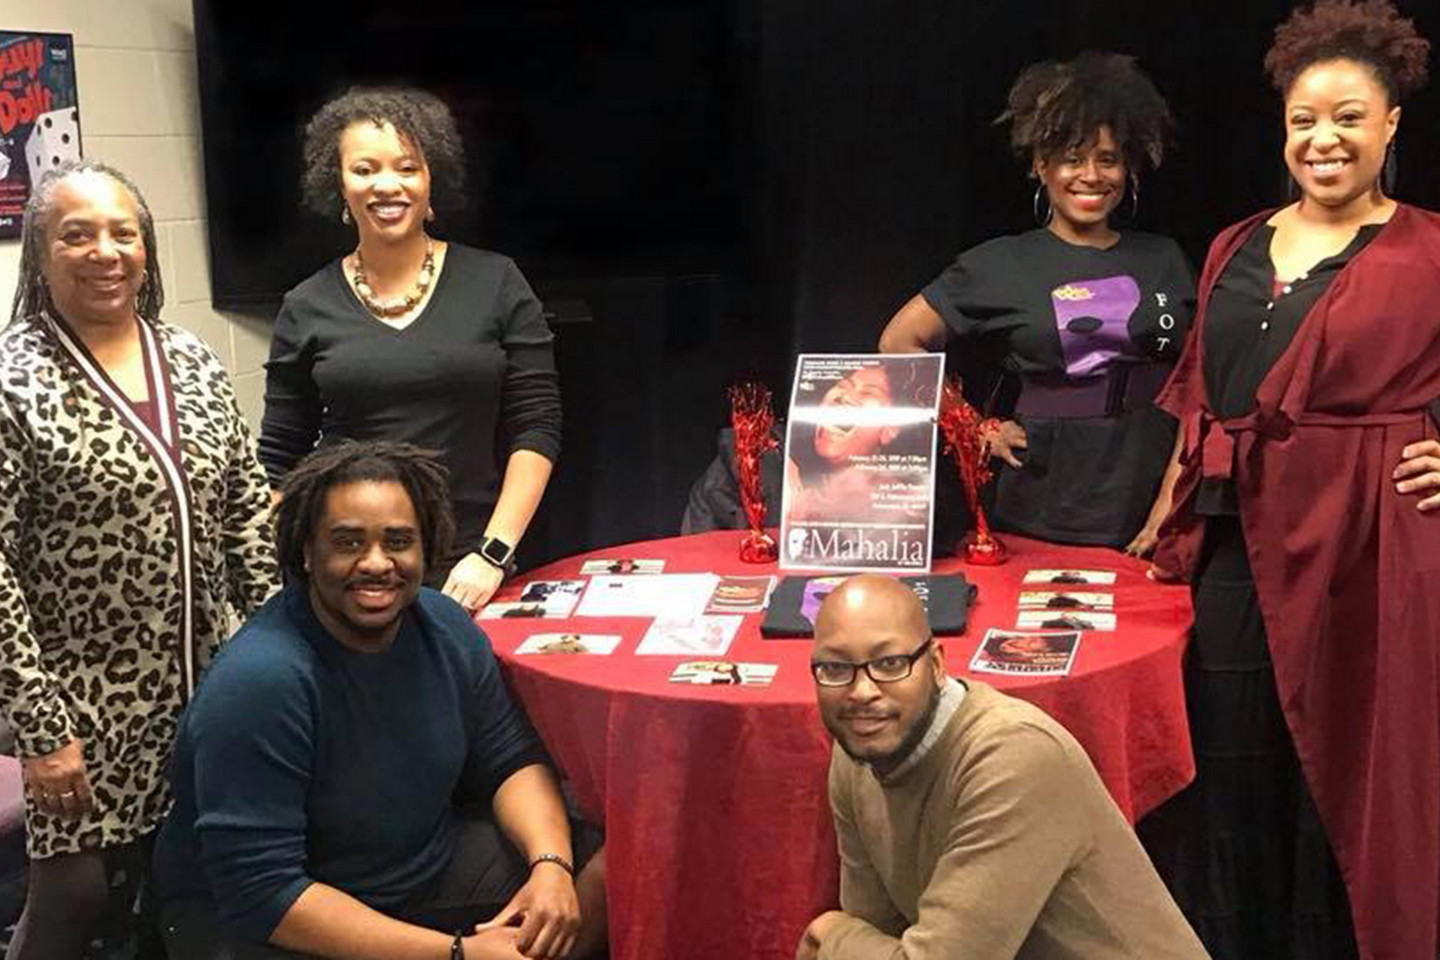 Reginald Edmund poses with members of the Face Off Theatre Company at a "Black Lives, Black Words" event in 2018.